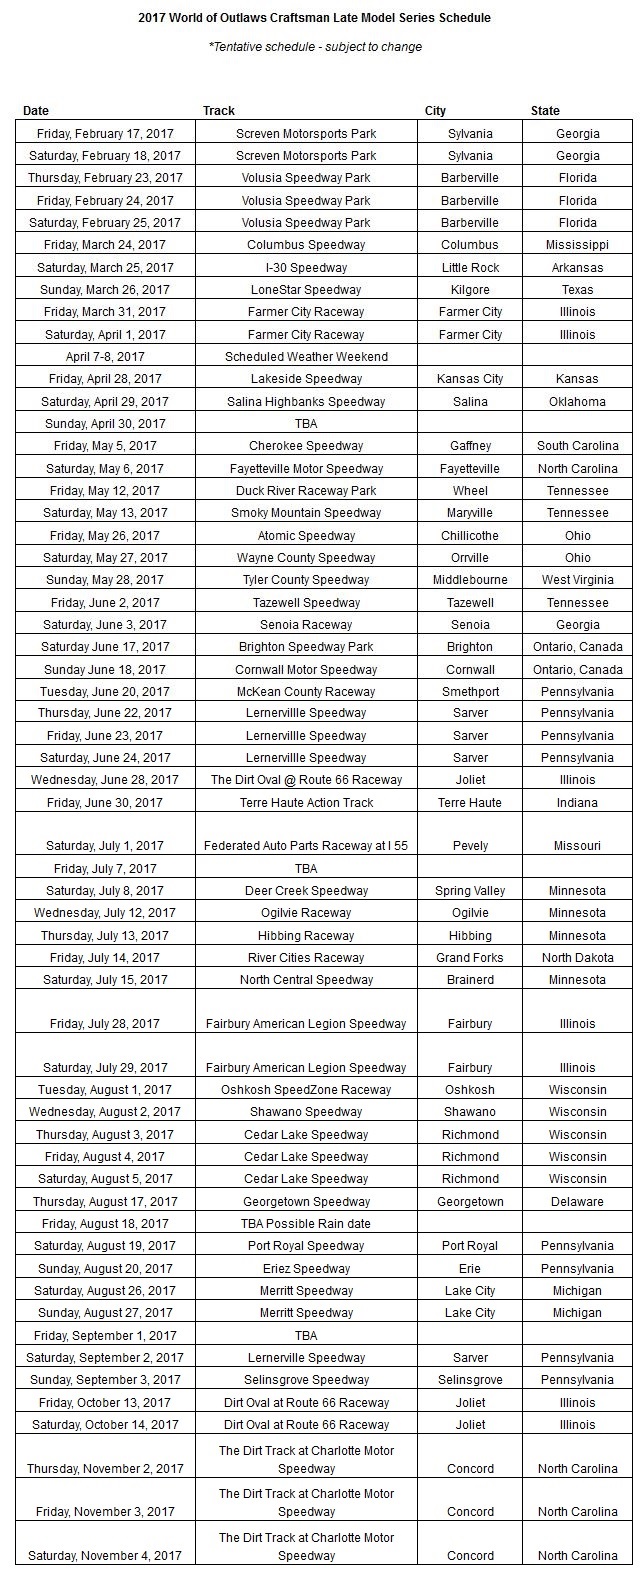 World of Outlaws Craftsman(R) Late Model Series 2017 Schedule Announced